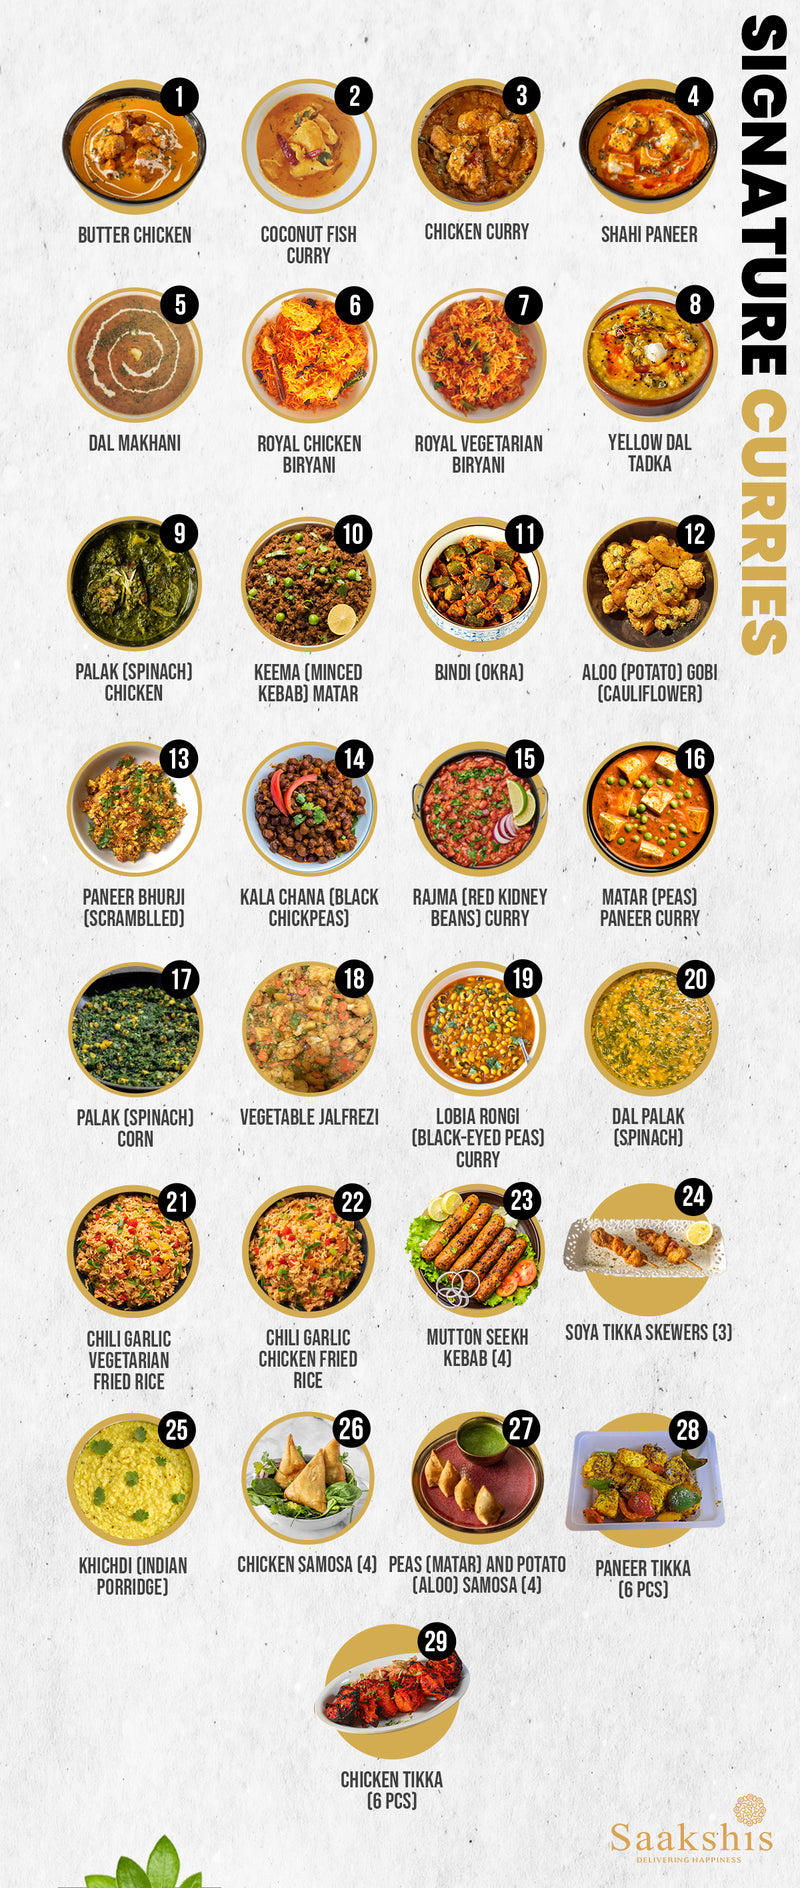 SIGNATURE CURRIES MIX & MATCH 5 WEEKLY MEALS PLAN